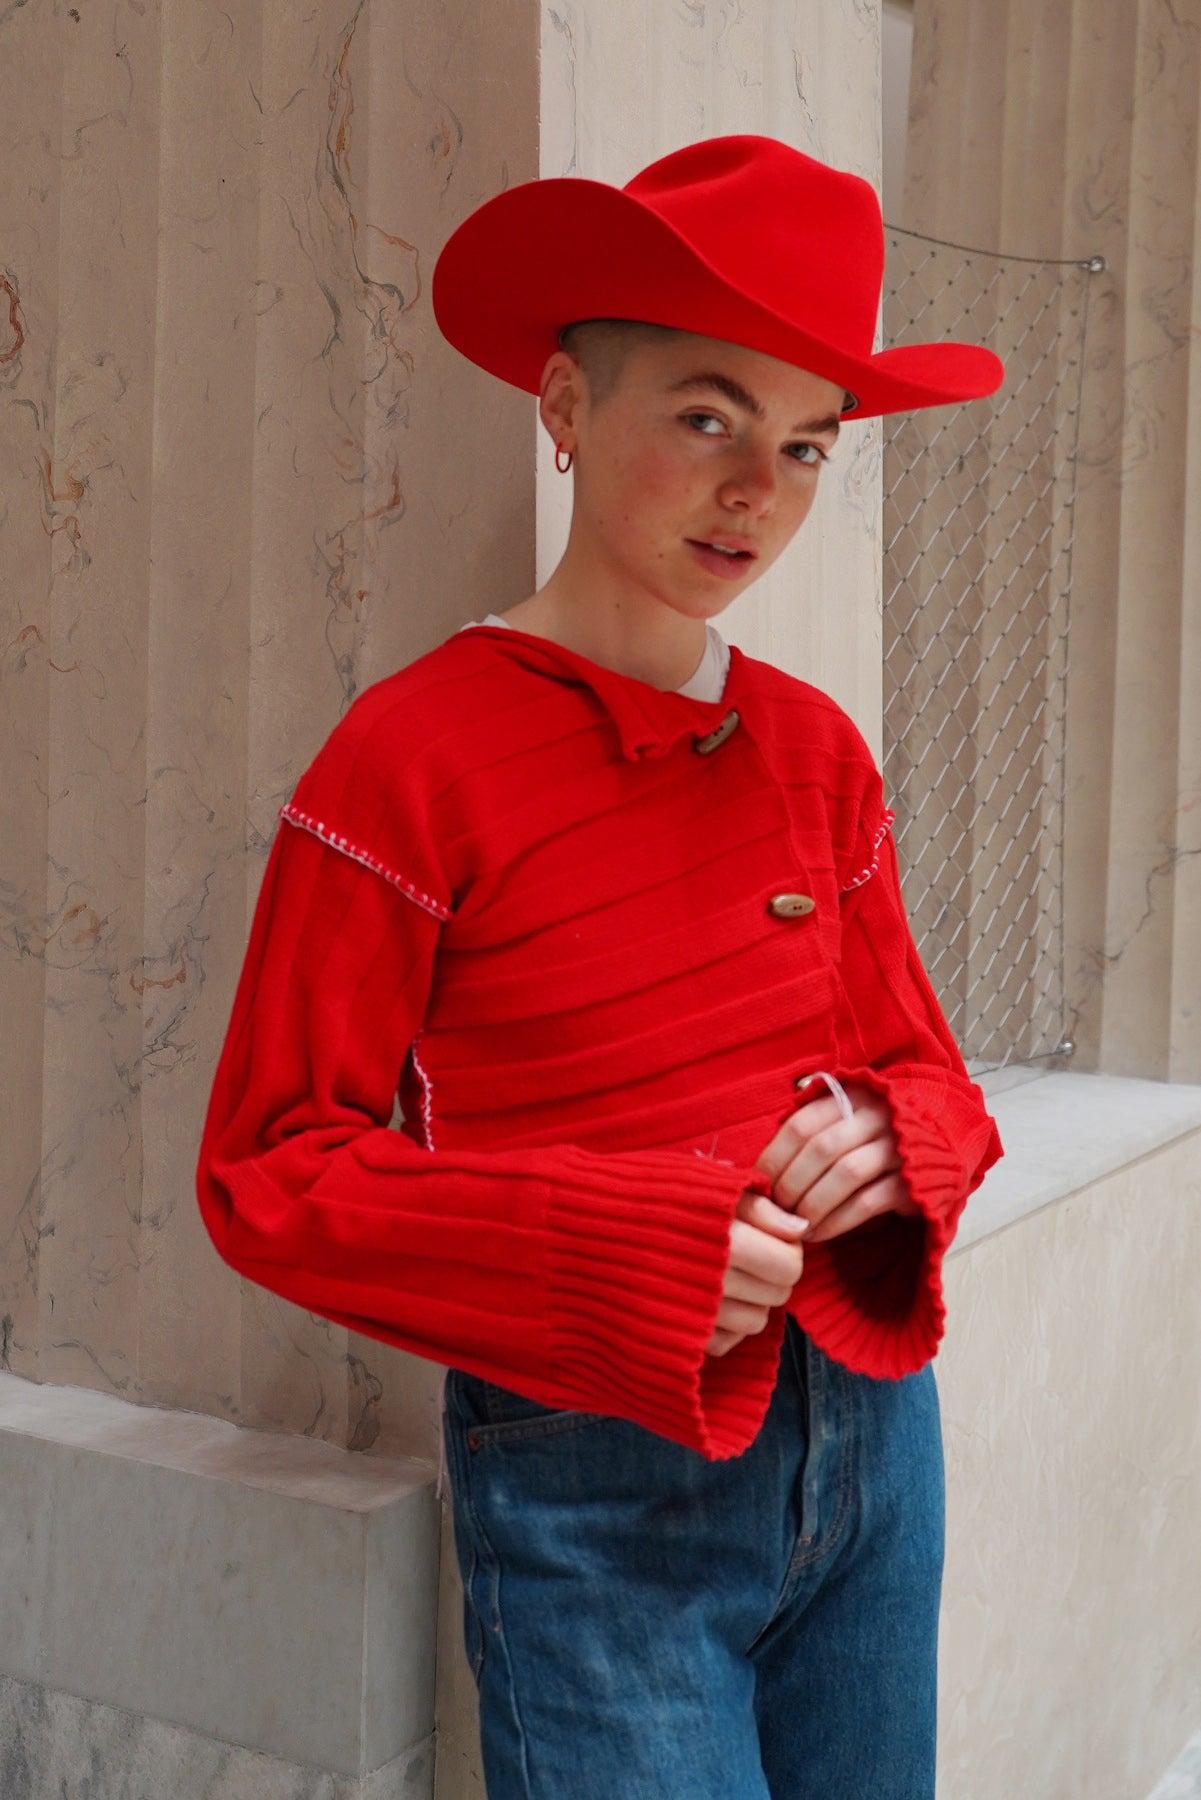 Unisex custom made red felt cowboy hat with a wide brim and center crease, handcrafted by SoonNoon in Stockholm